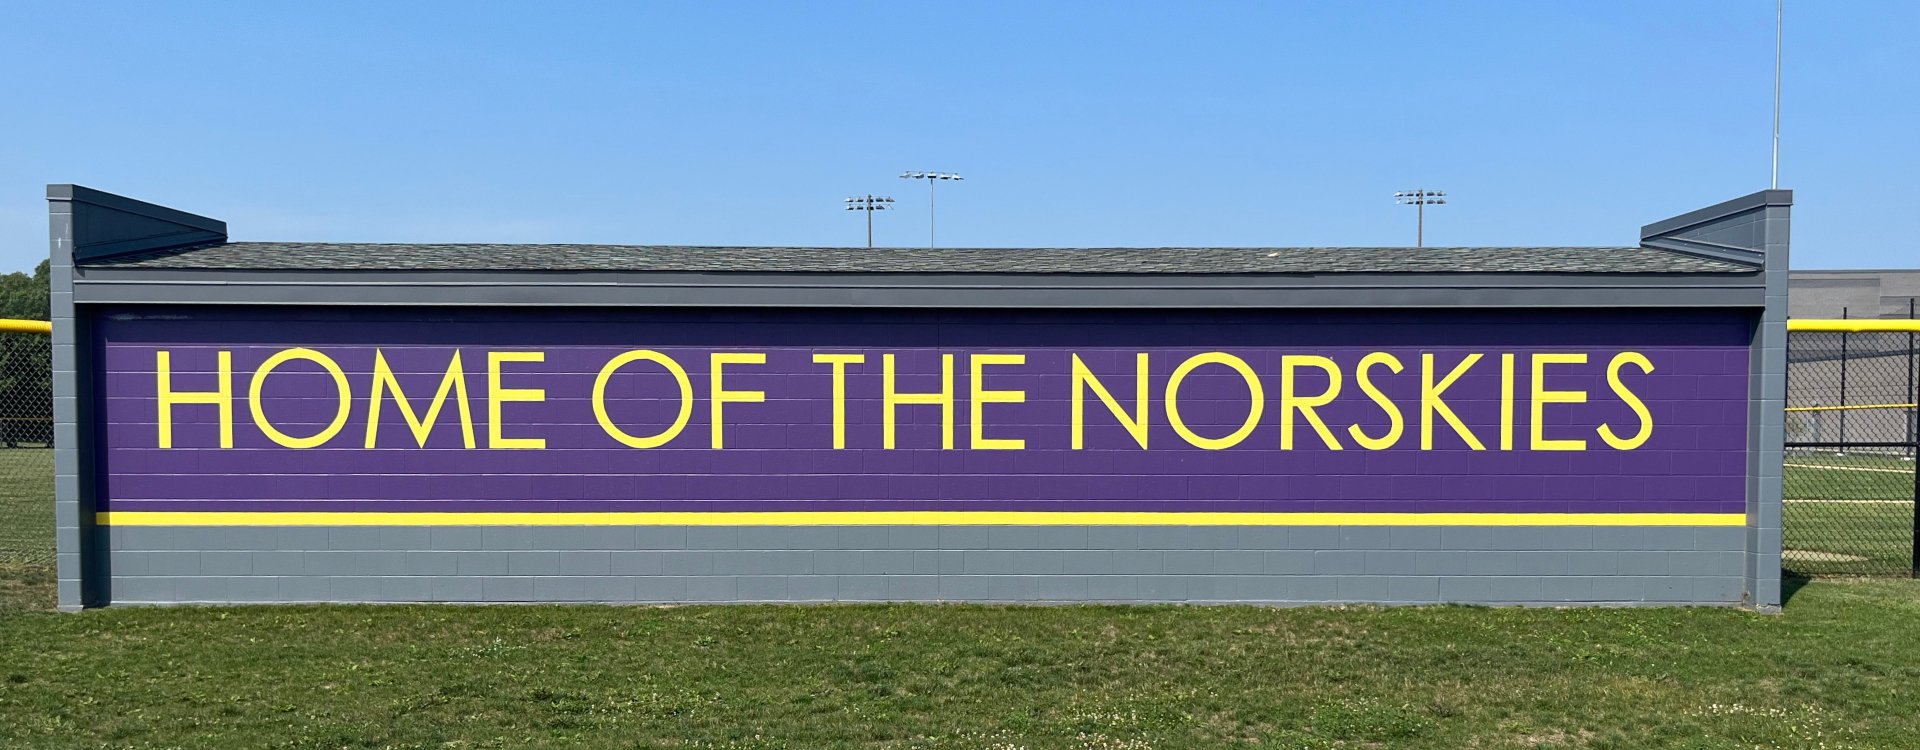 field sign 'home of the norskies'